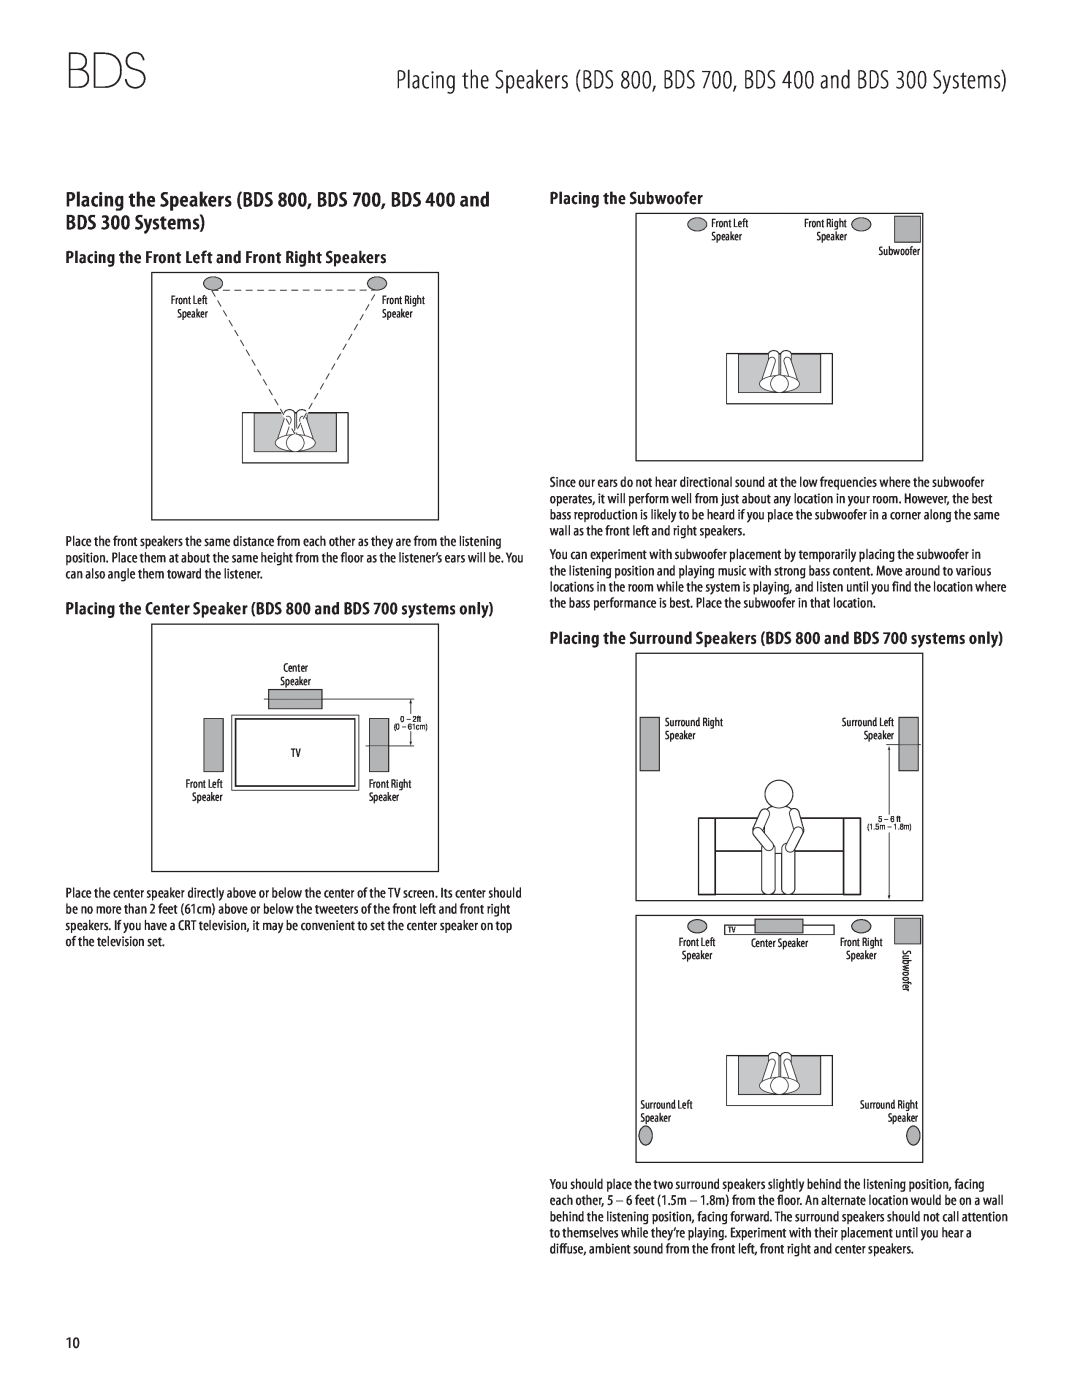 Harman-Kardon 950-0321-001 owner manual Placing the Front Left and Front Right Speakers, Placing the Subwoofer 